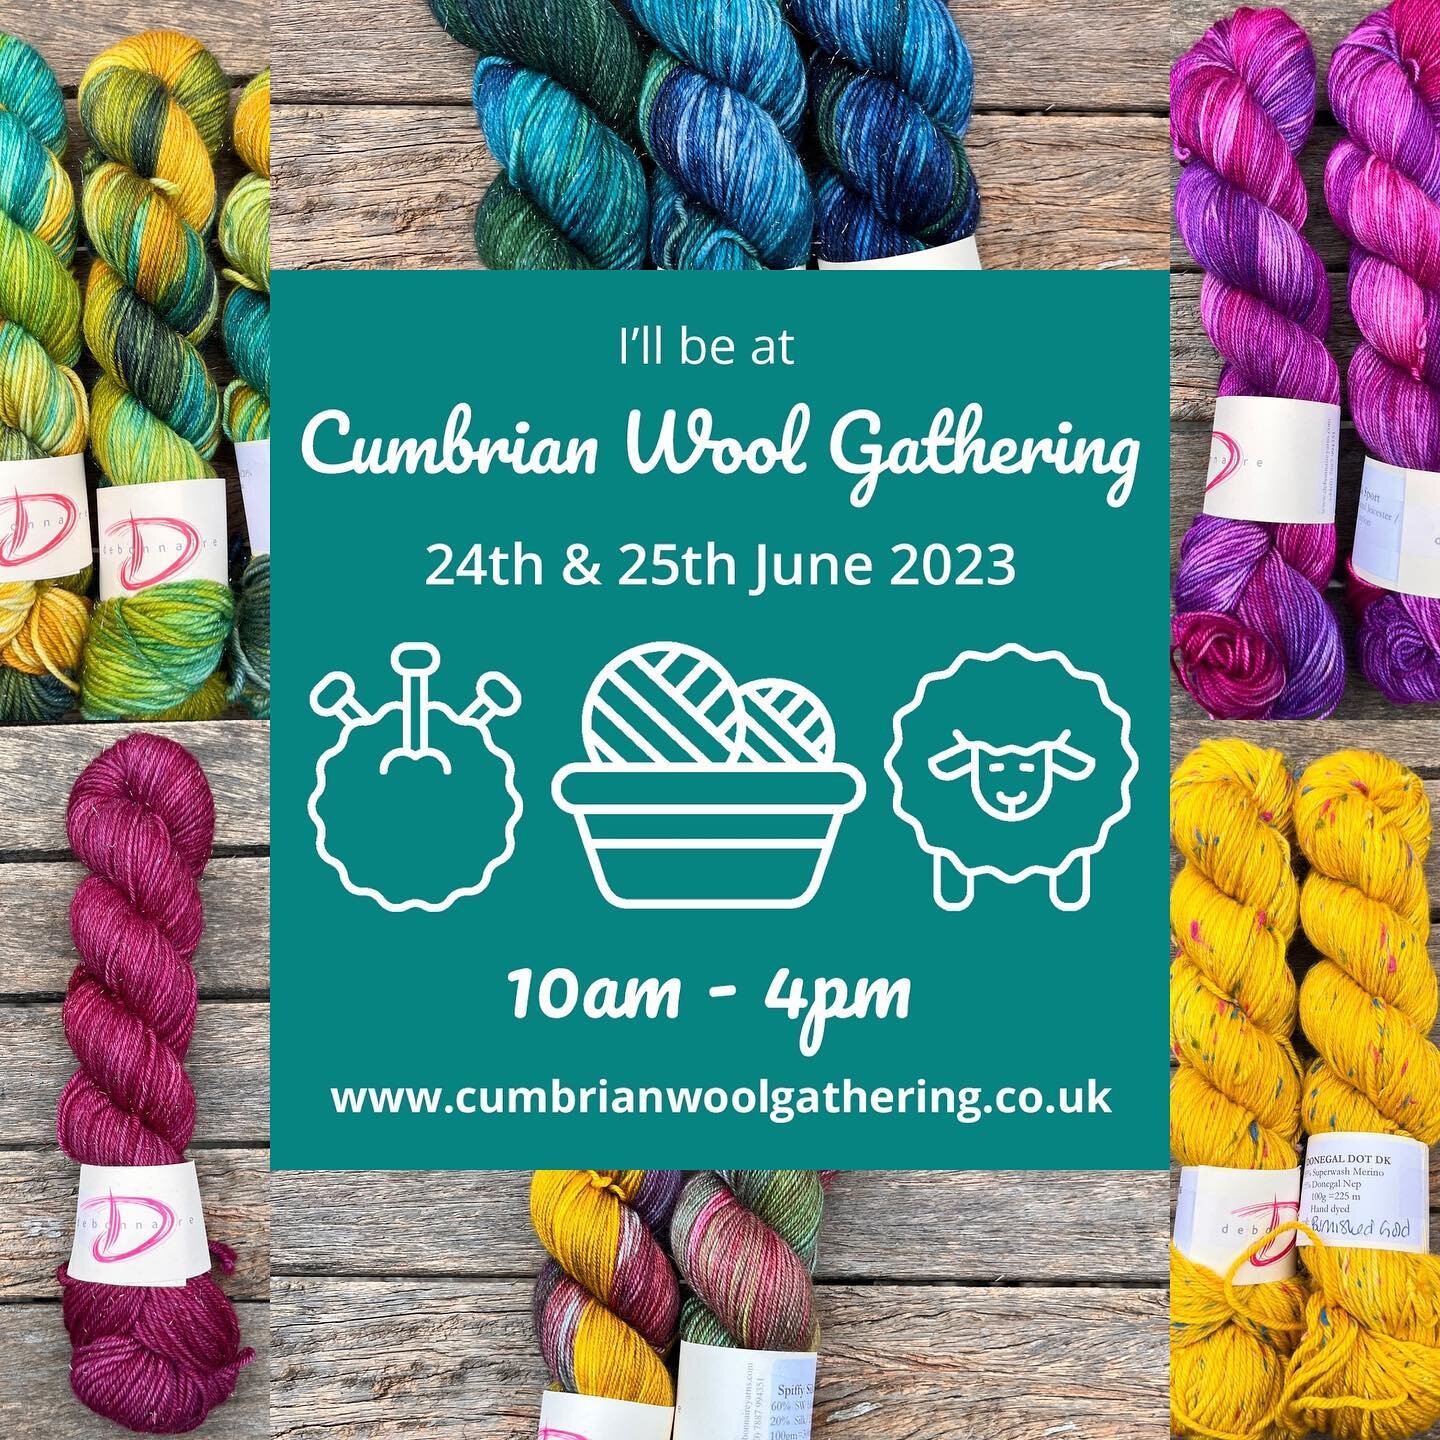 I am very excited about this new show in the Lake District. Hope to see lots of you there @cumbrianwoolgathering !